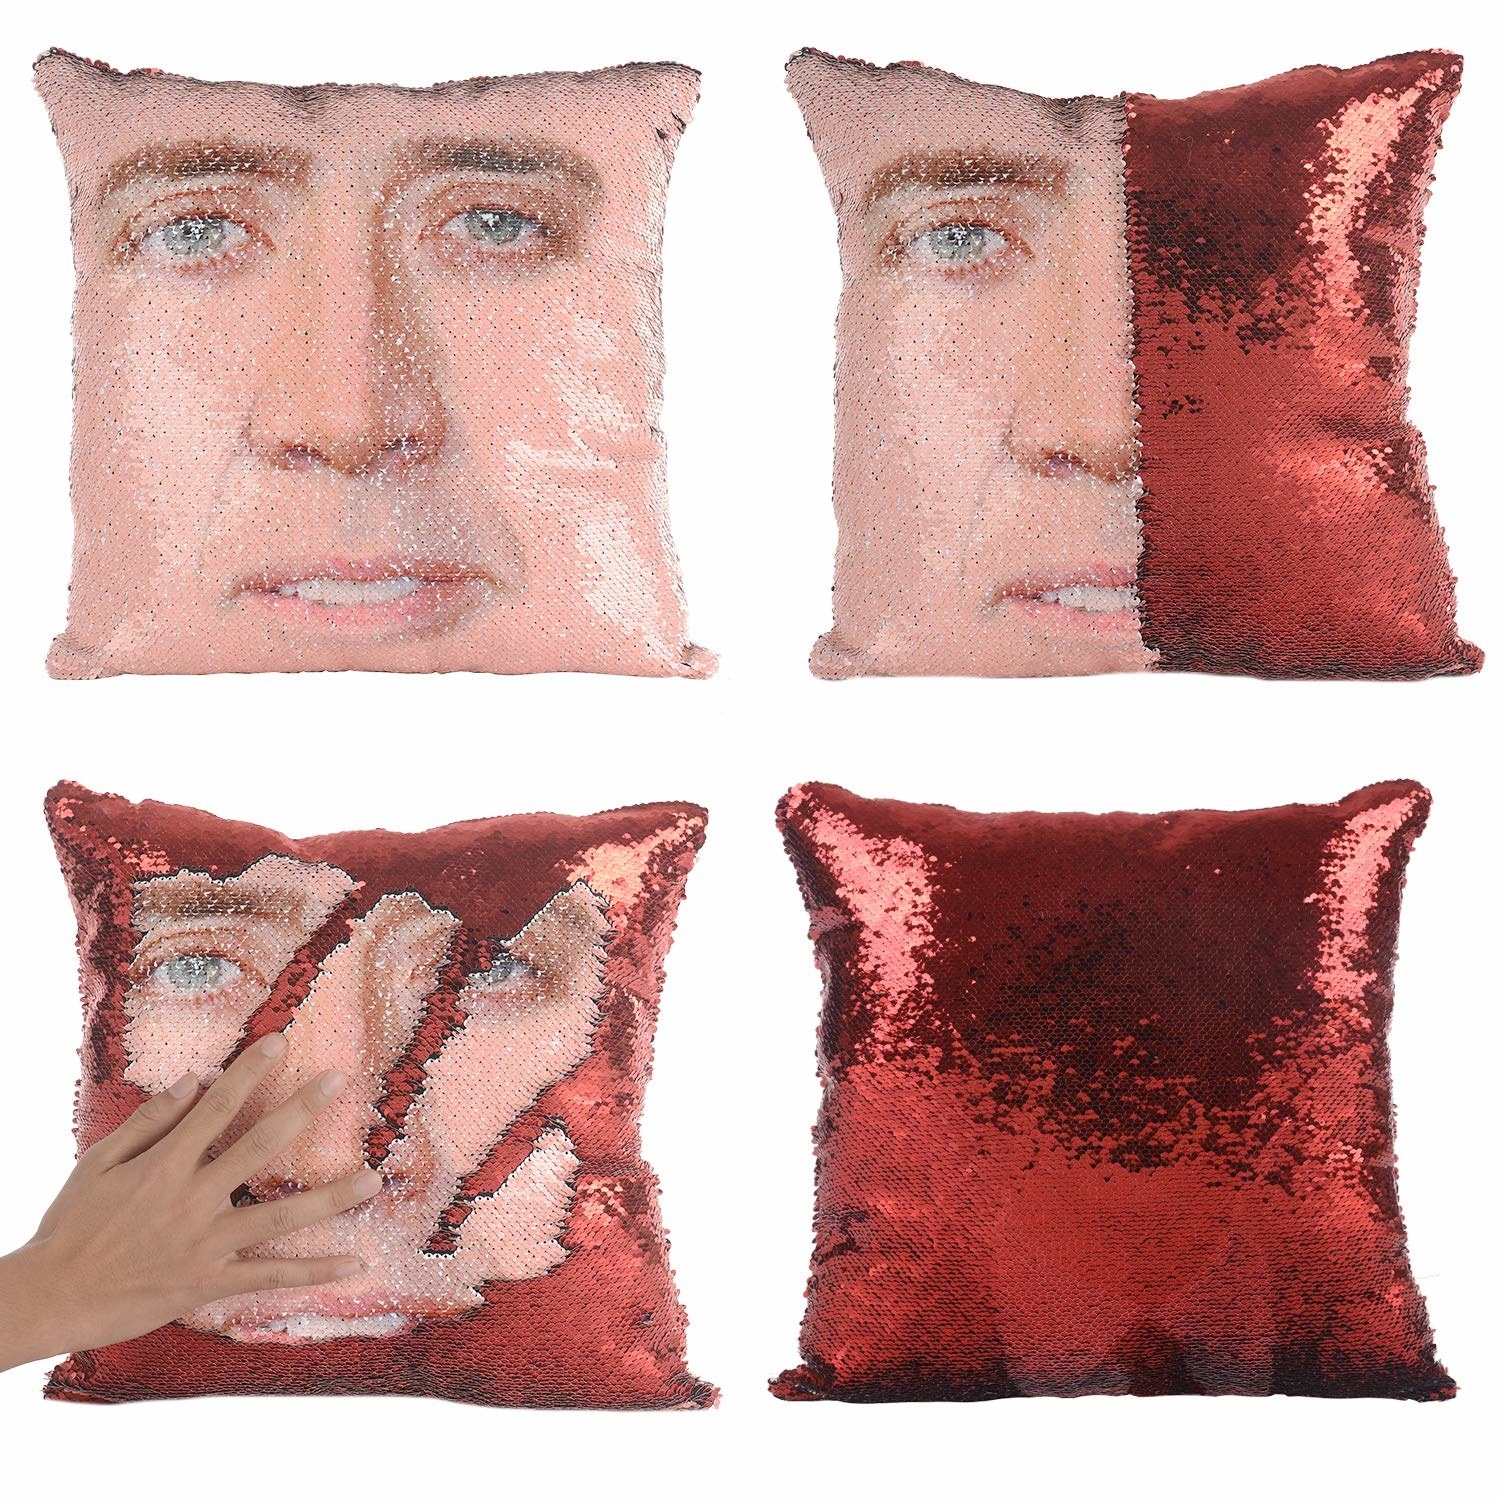 The solid-colored sequins, when brushed in the opposite direction, reveal the face of Nic Cage 